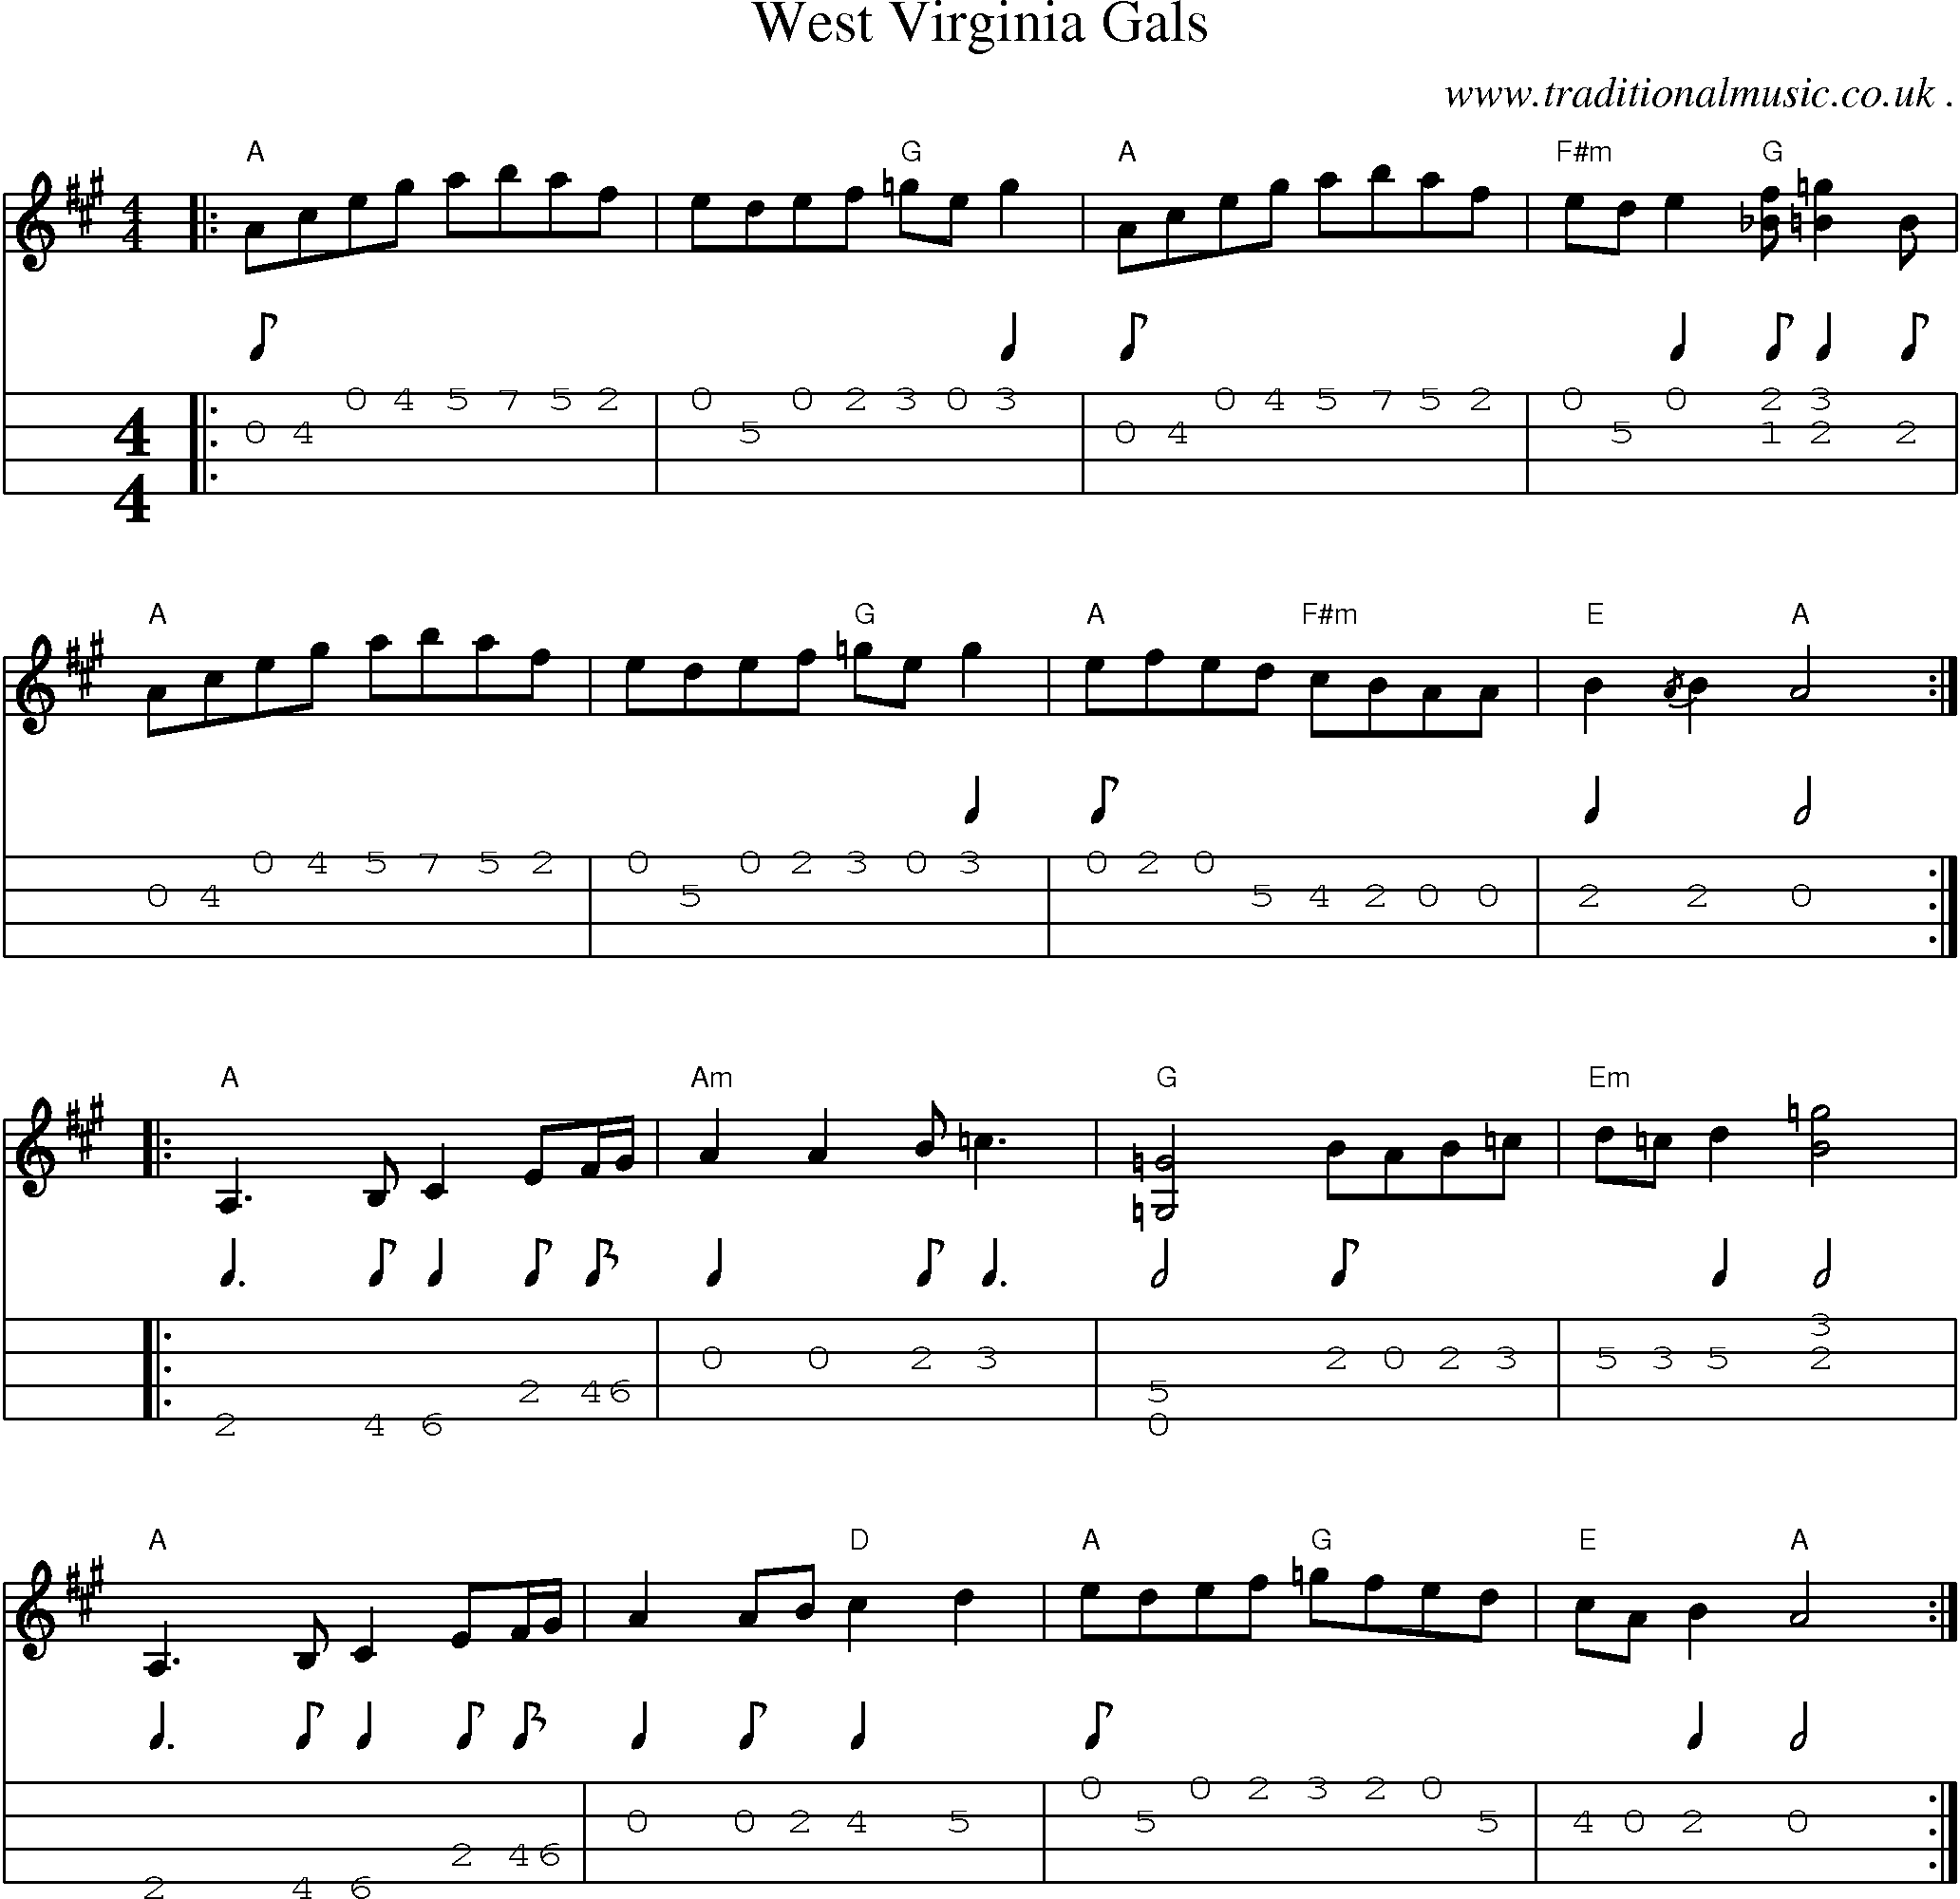 Music Score and Guitar Tabs for West Virginia Gals